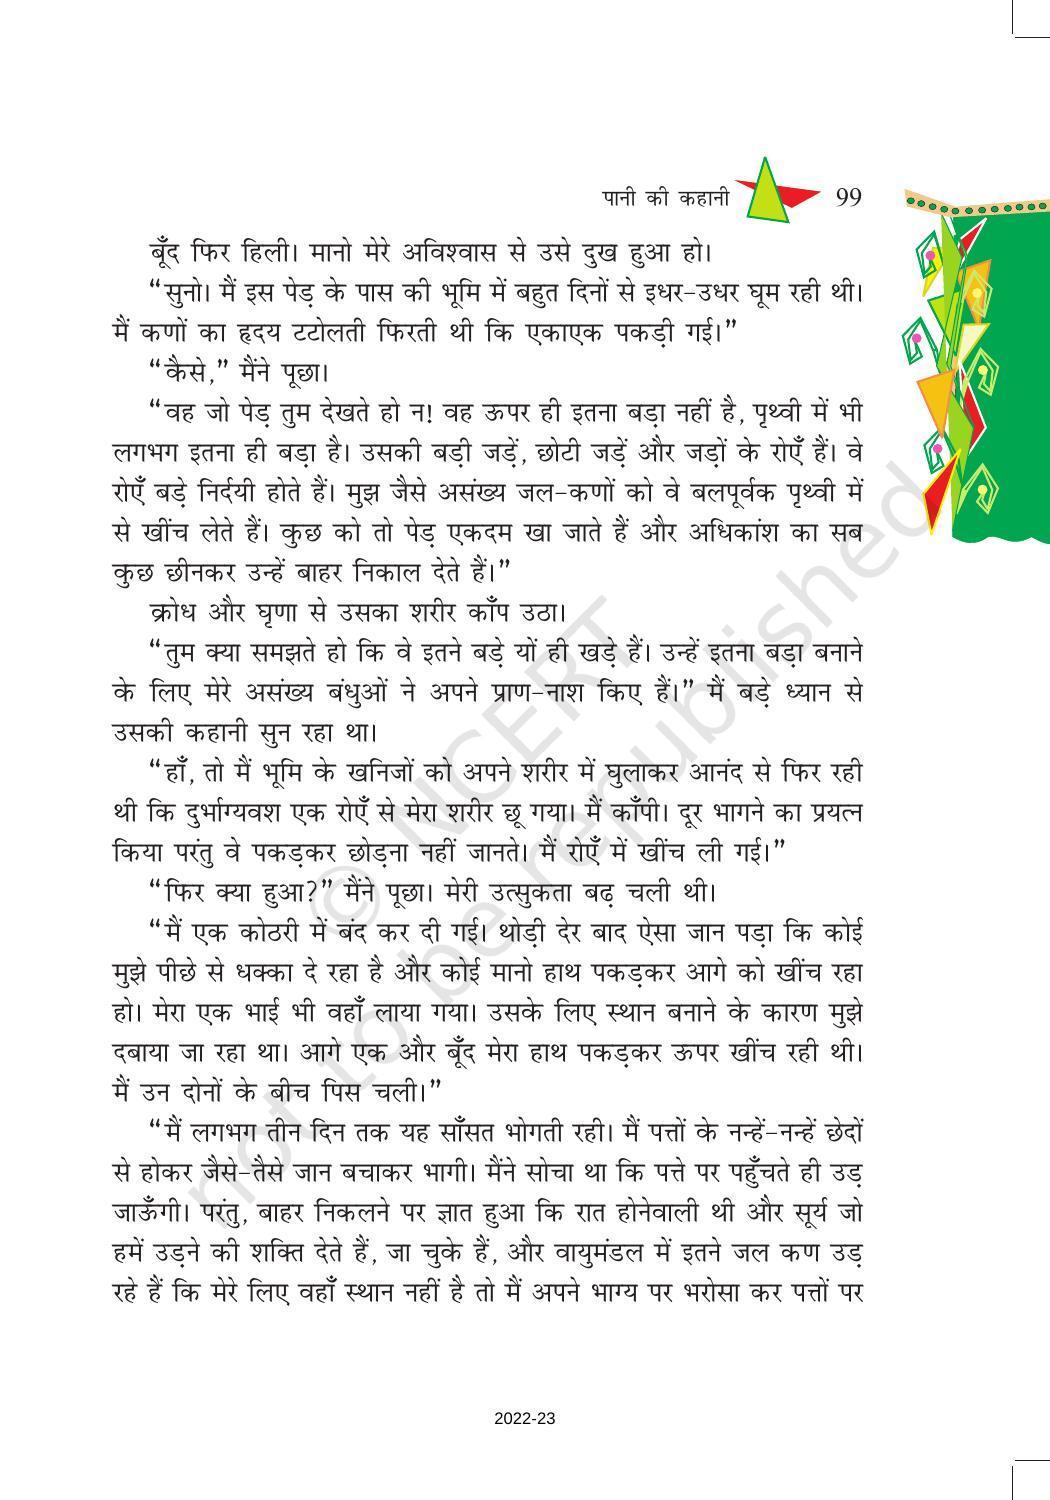 NCERT Book for Class 8 Hindi Vasant Chapter 16 पानी की कहानी - Page 2